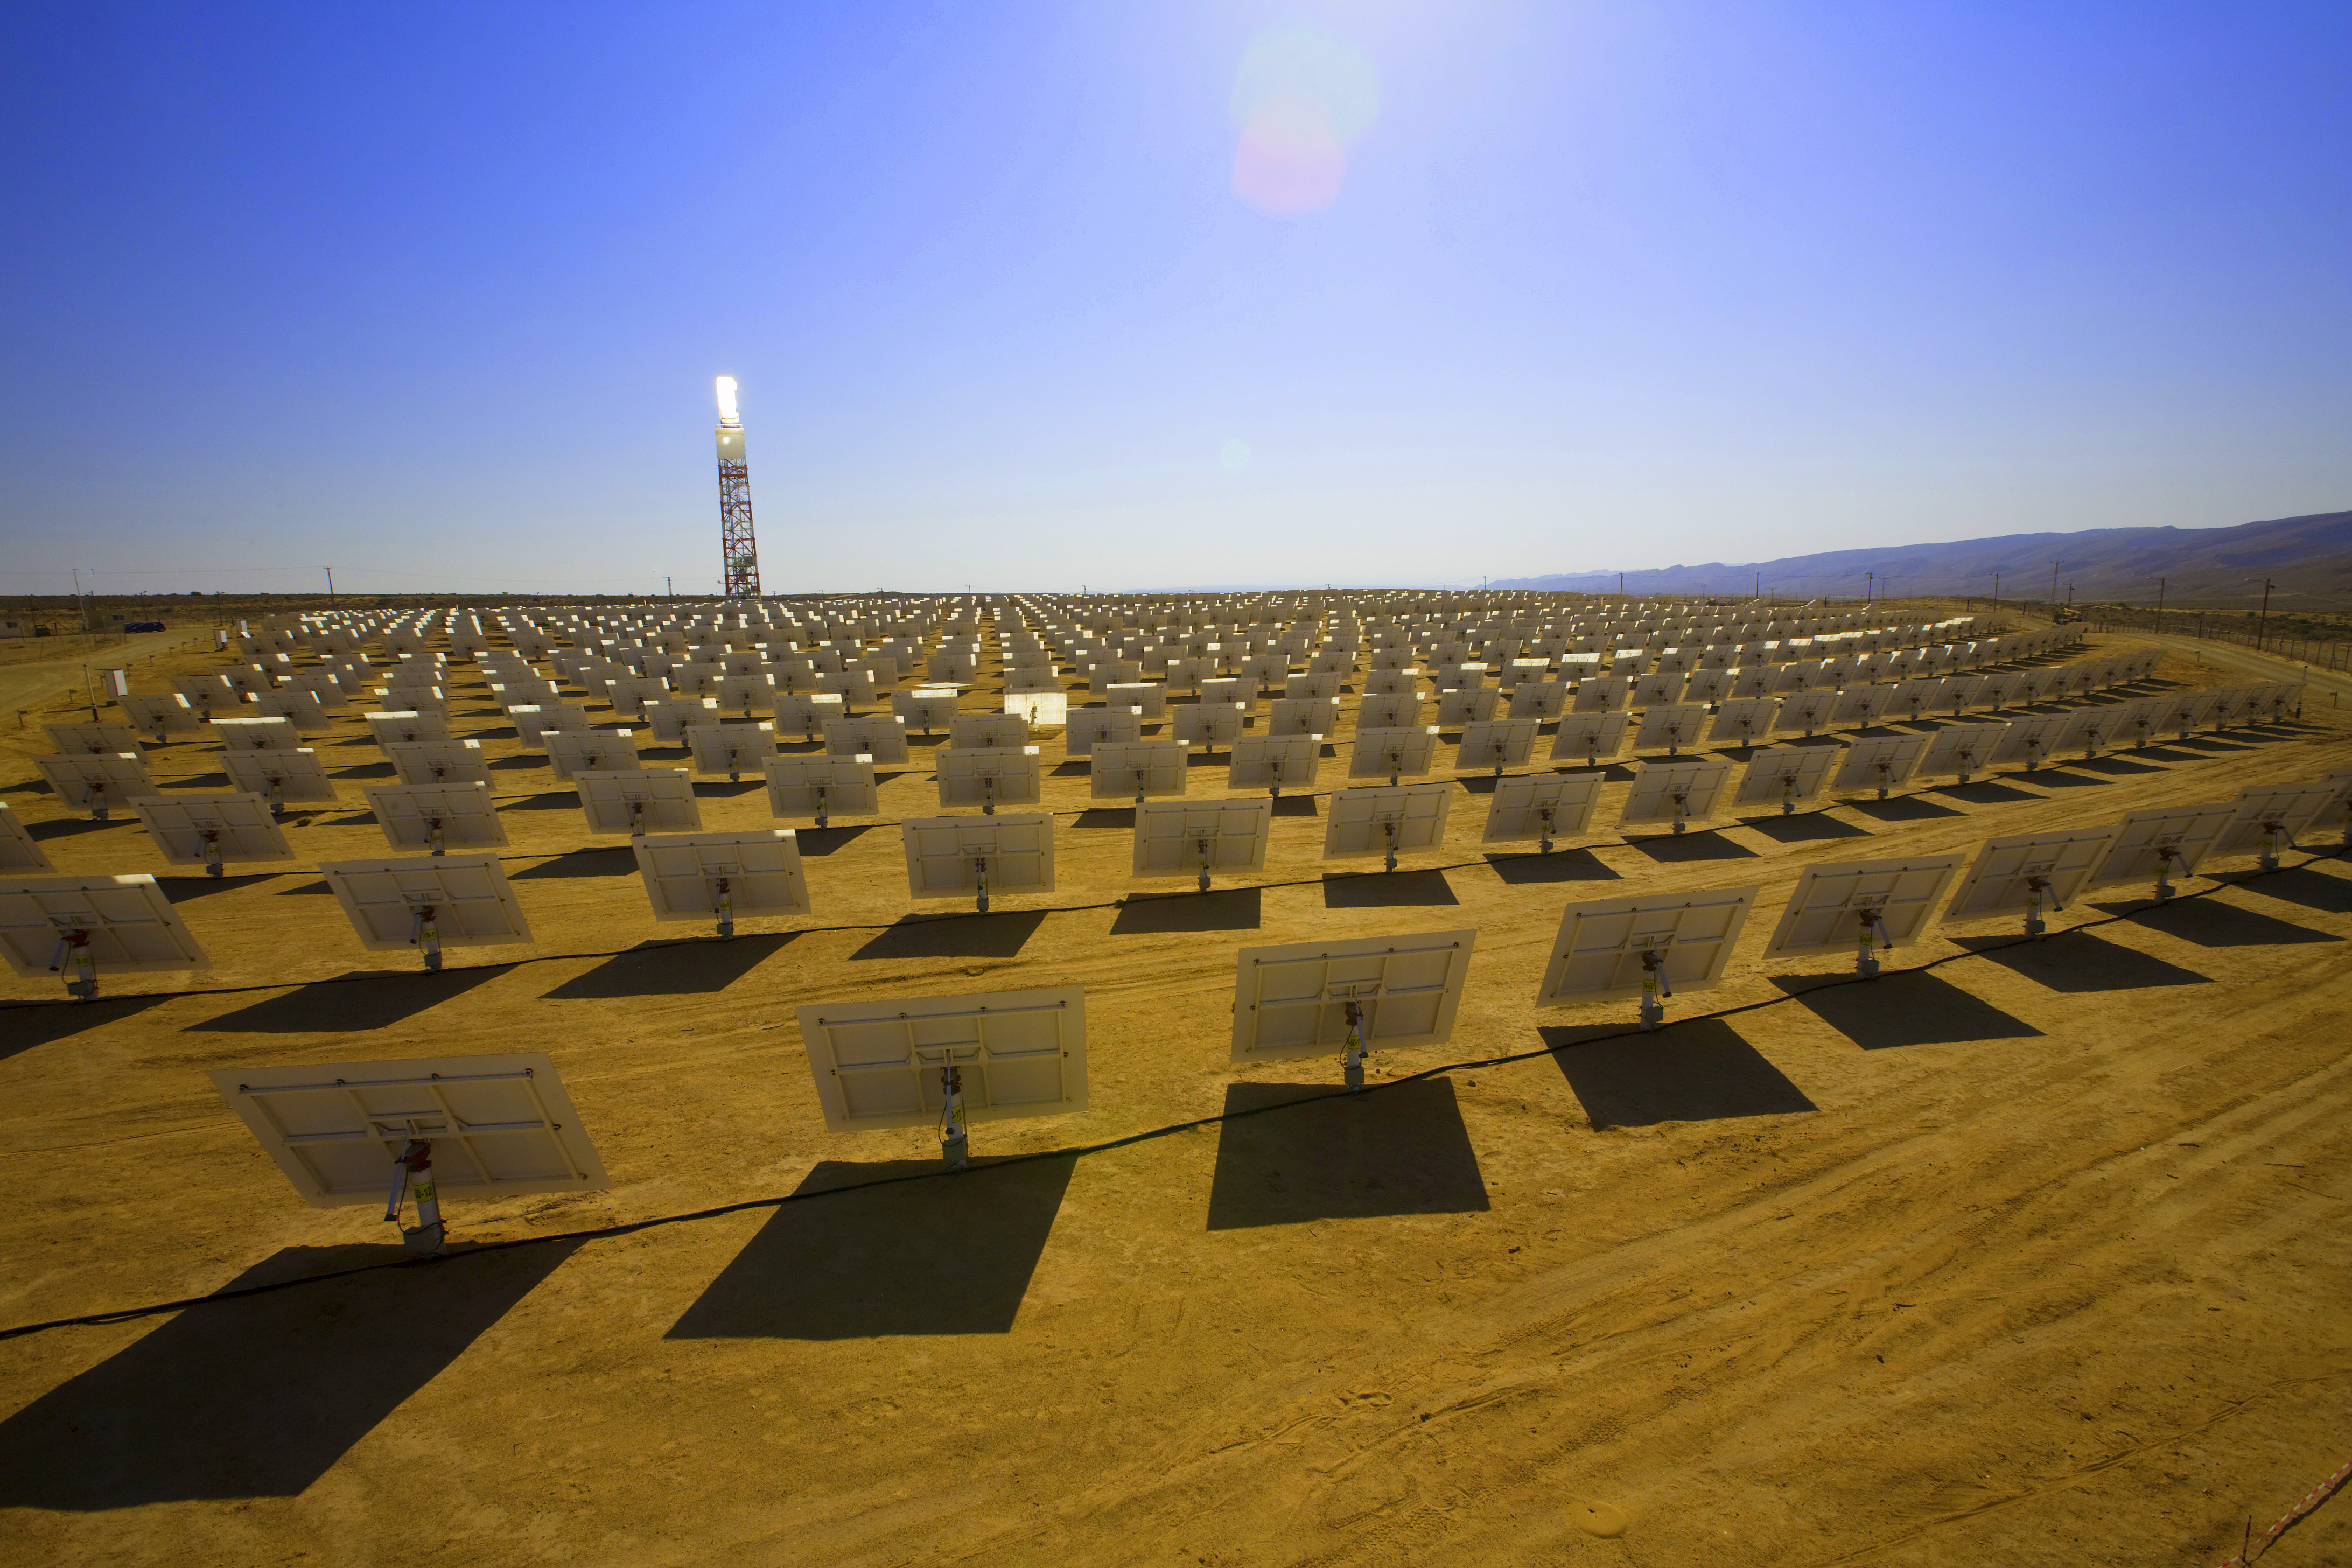 Kvaser’s CAN interfaces at the heart of solar field communications